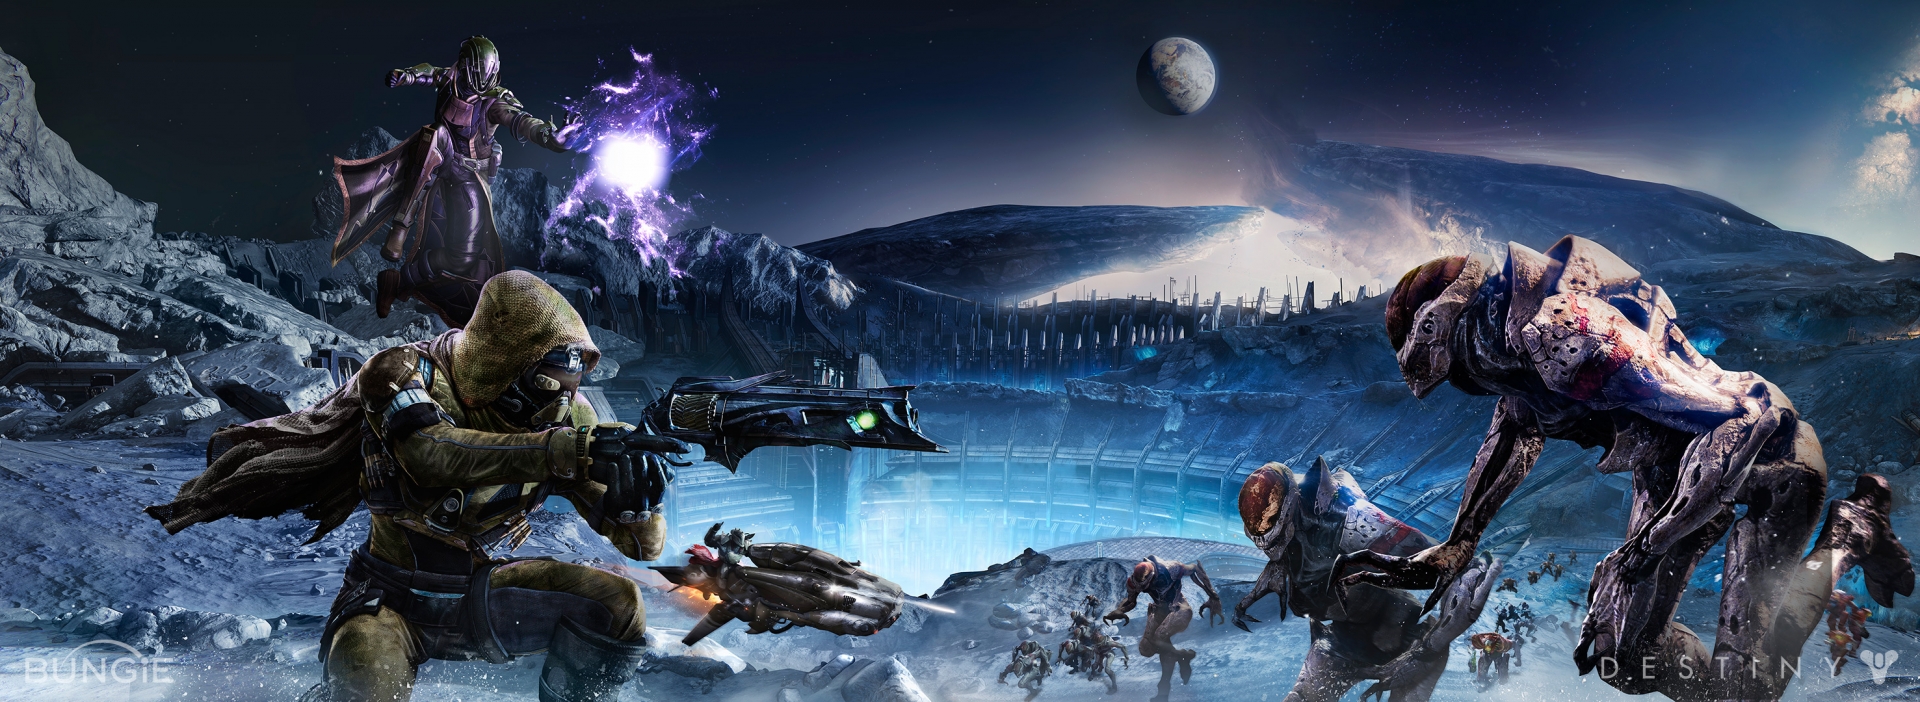 Reveals Breathtaking HD panoramic Wallpapers for Destiny PS4 and Xbox